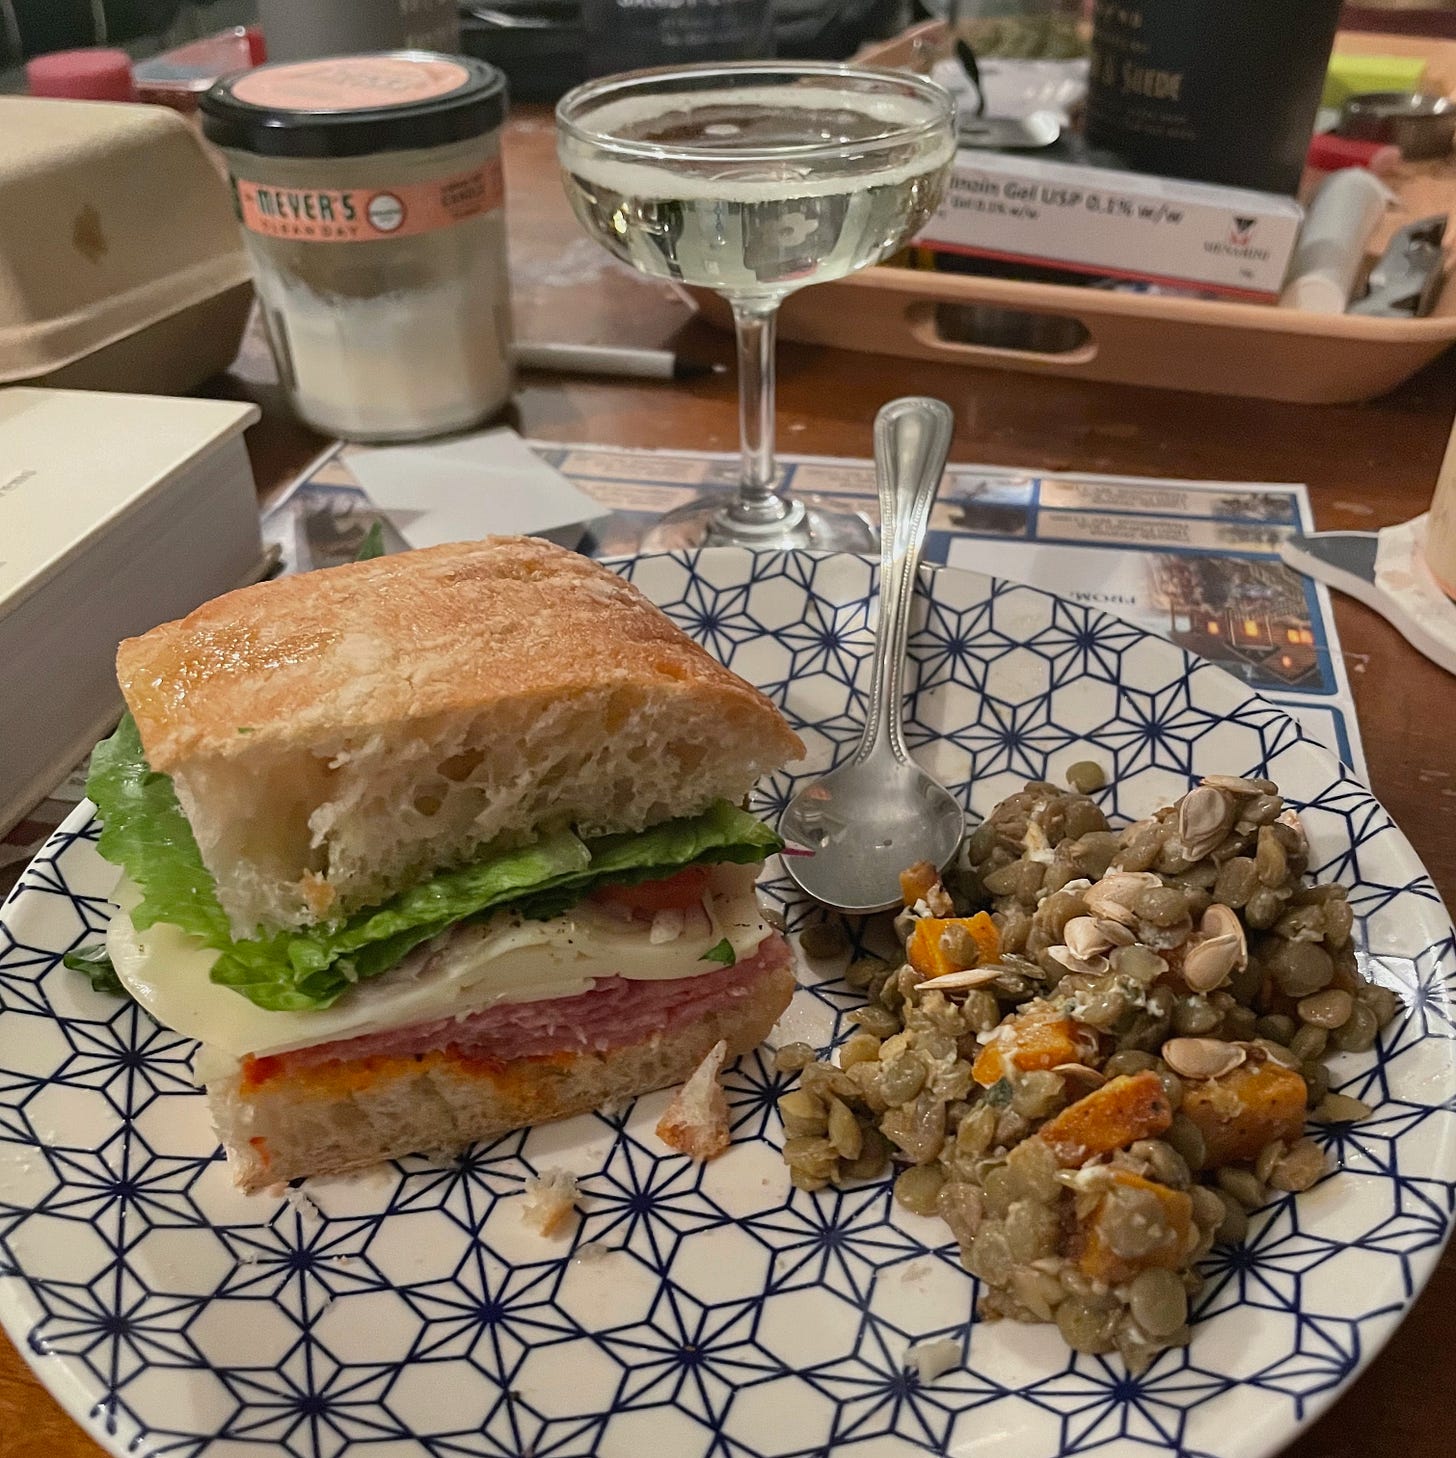 plate with sandwich and squash lentil salad with champagne glass behind it